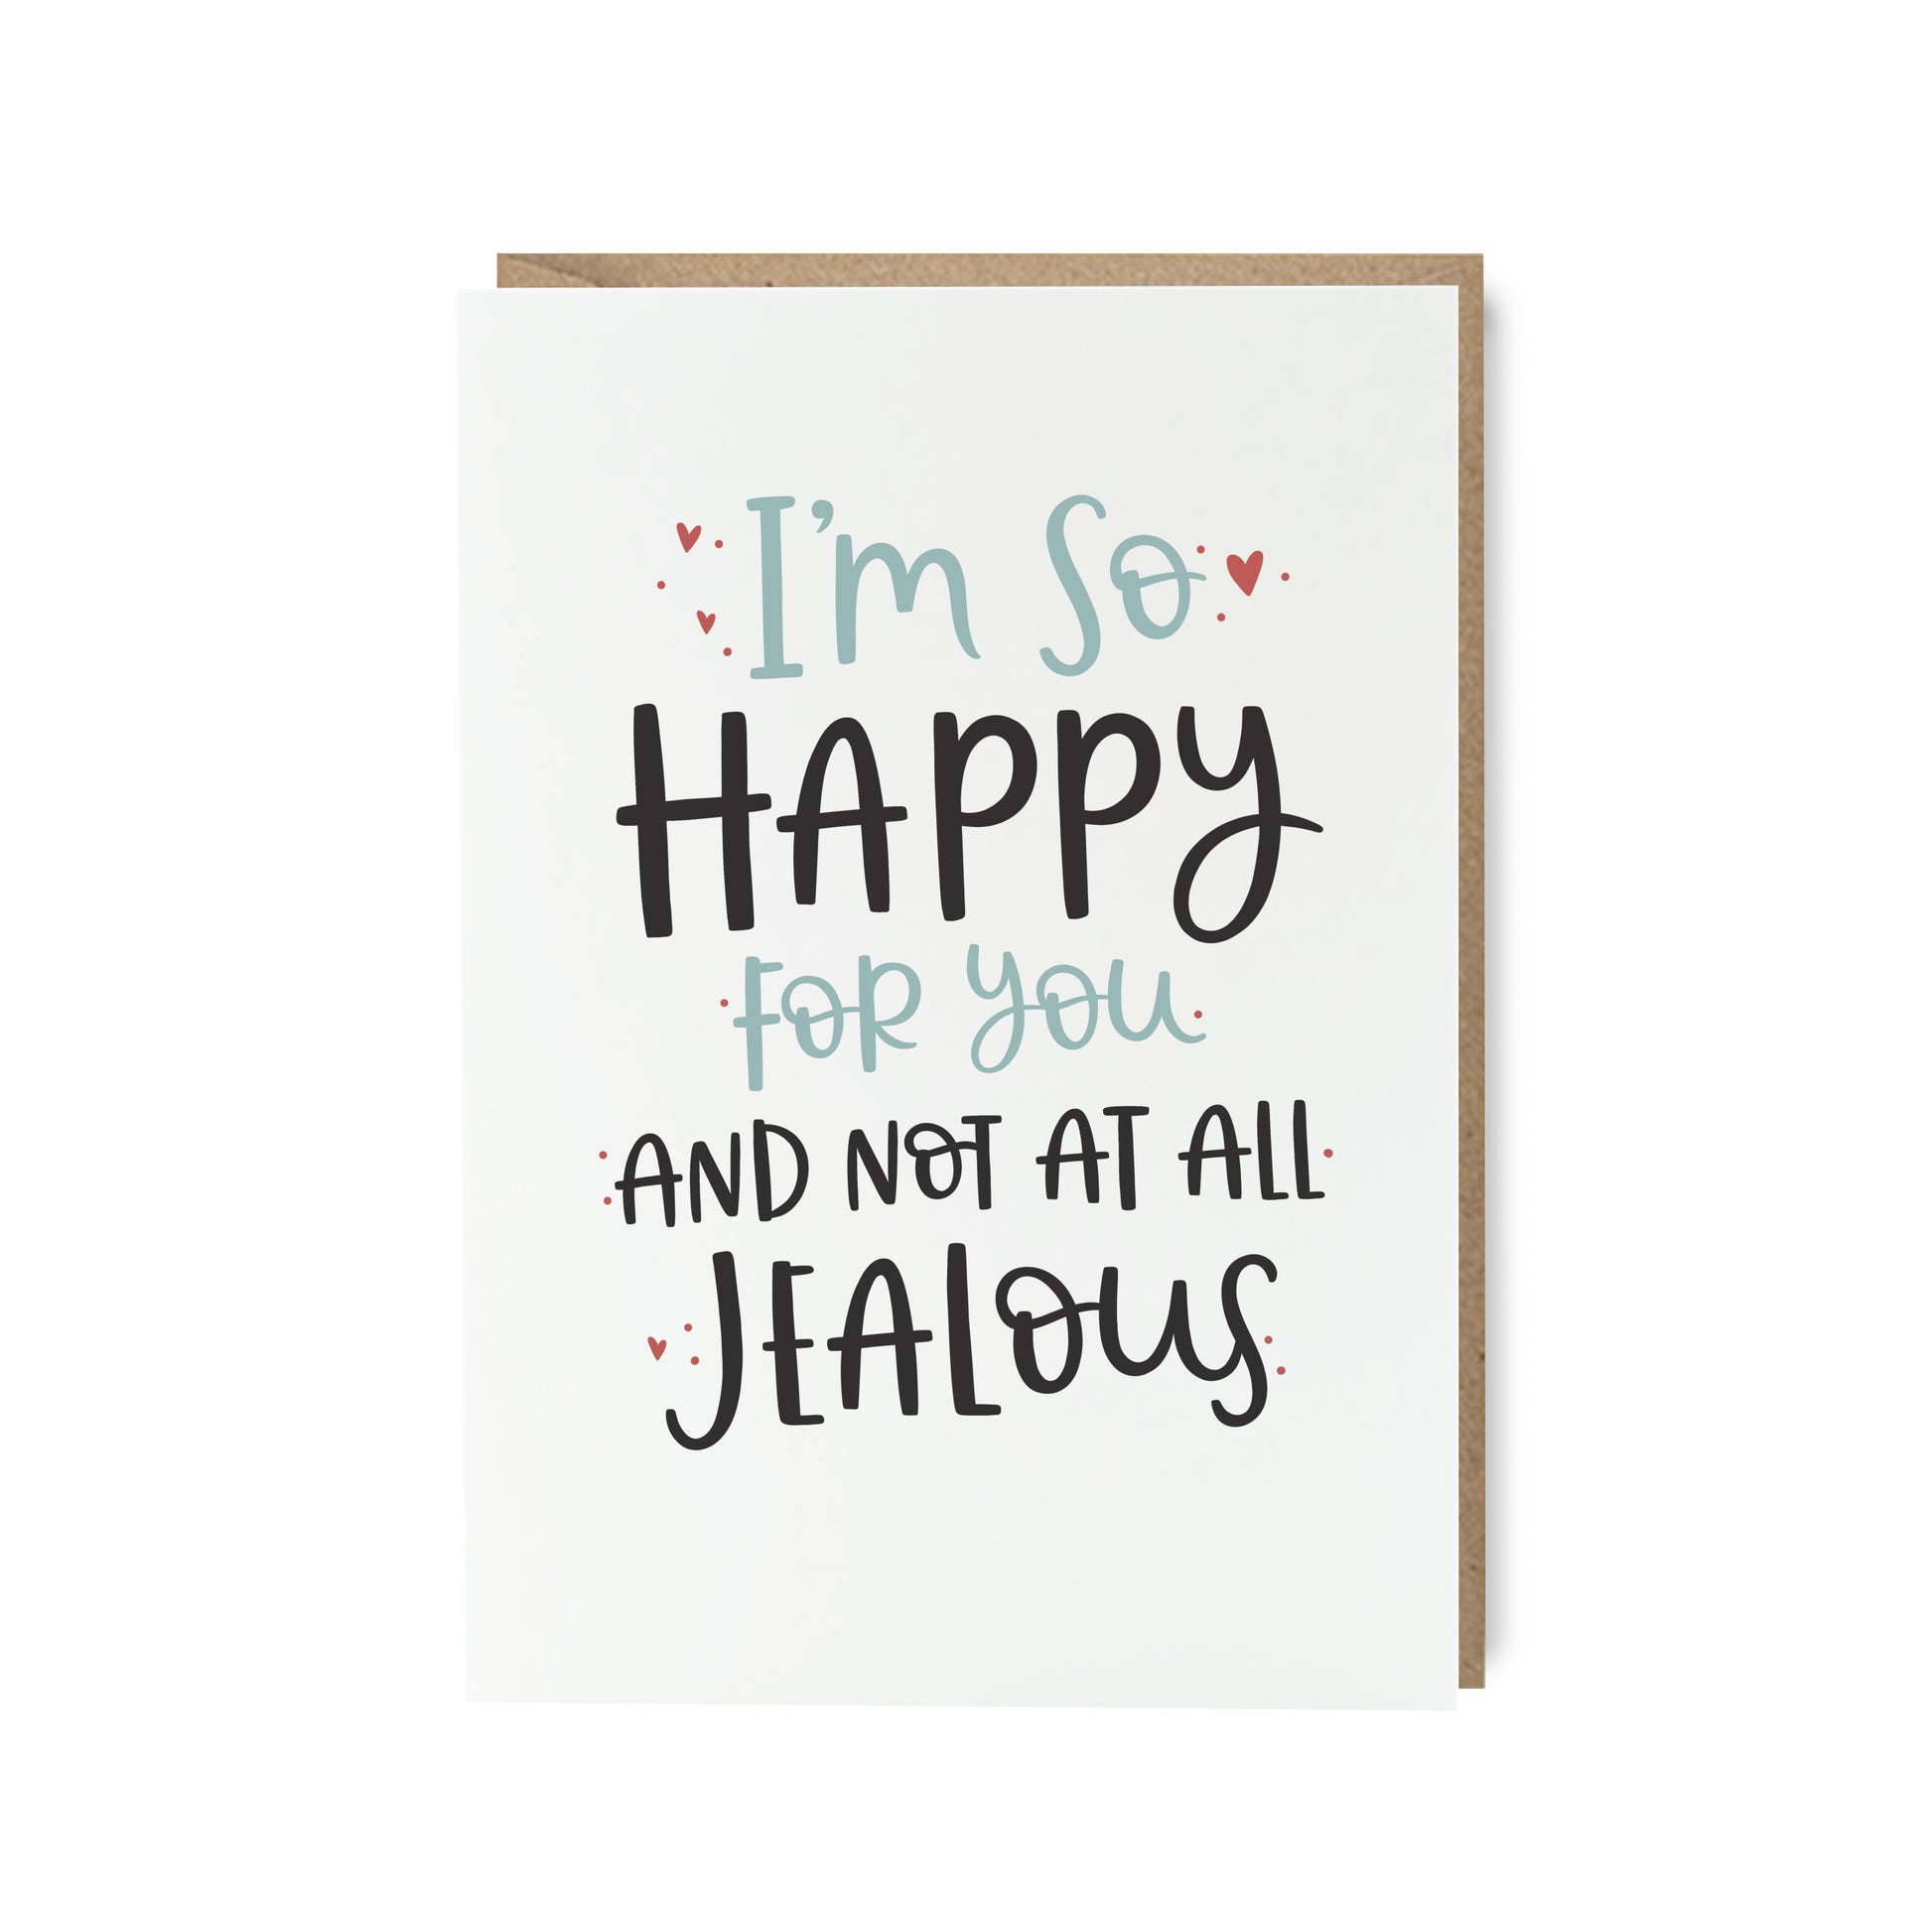 So happy for you and not at all jealous funny congratulations card by abbie imagine